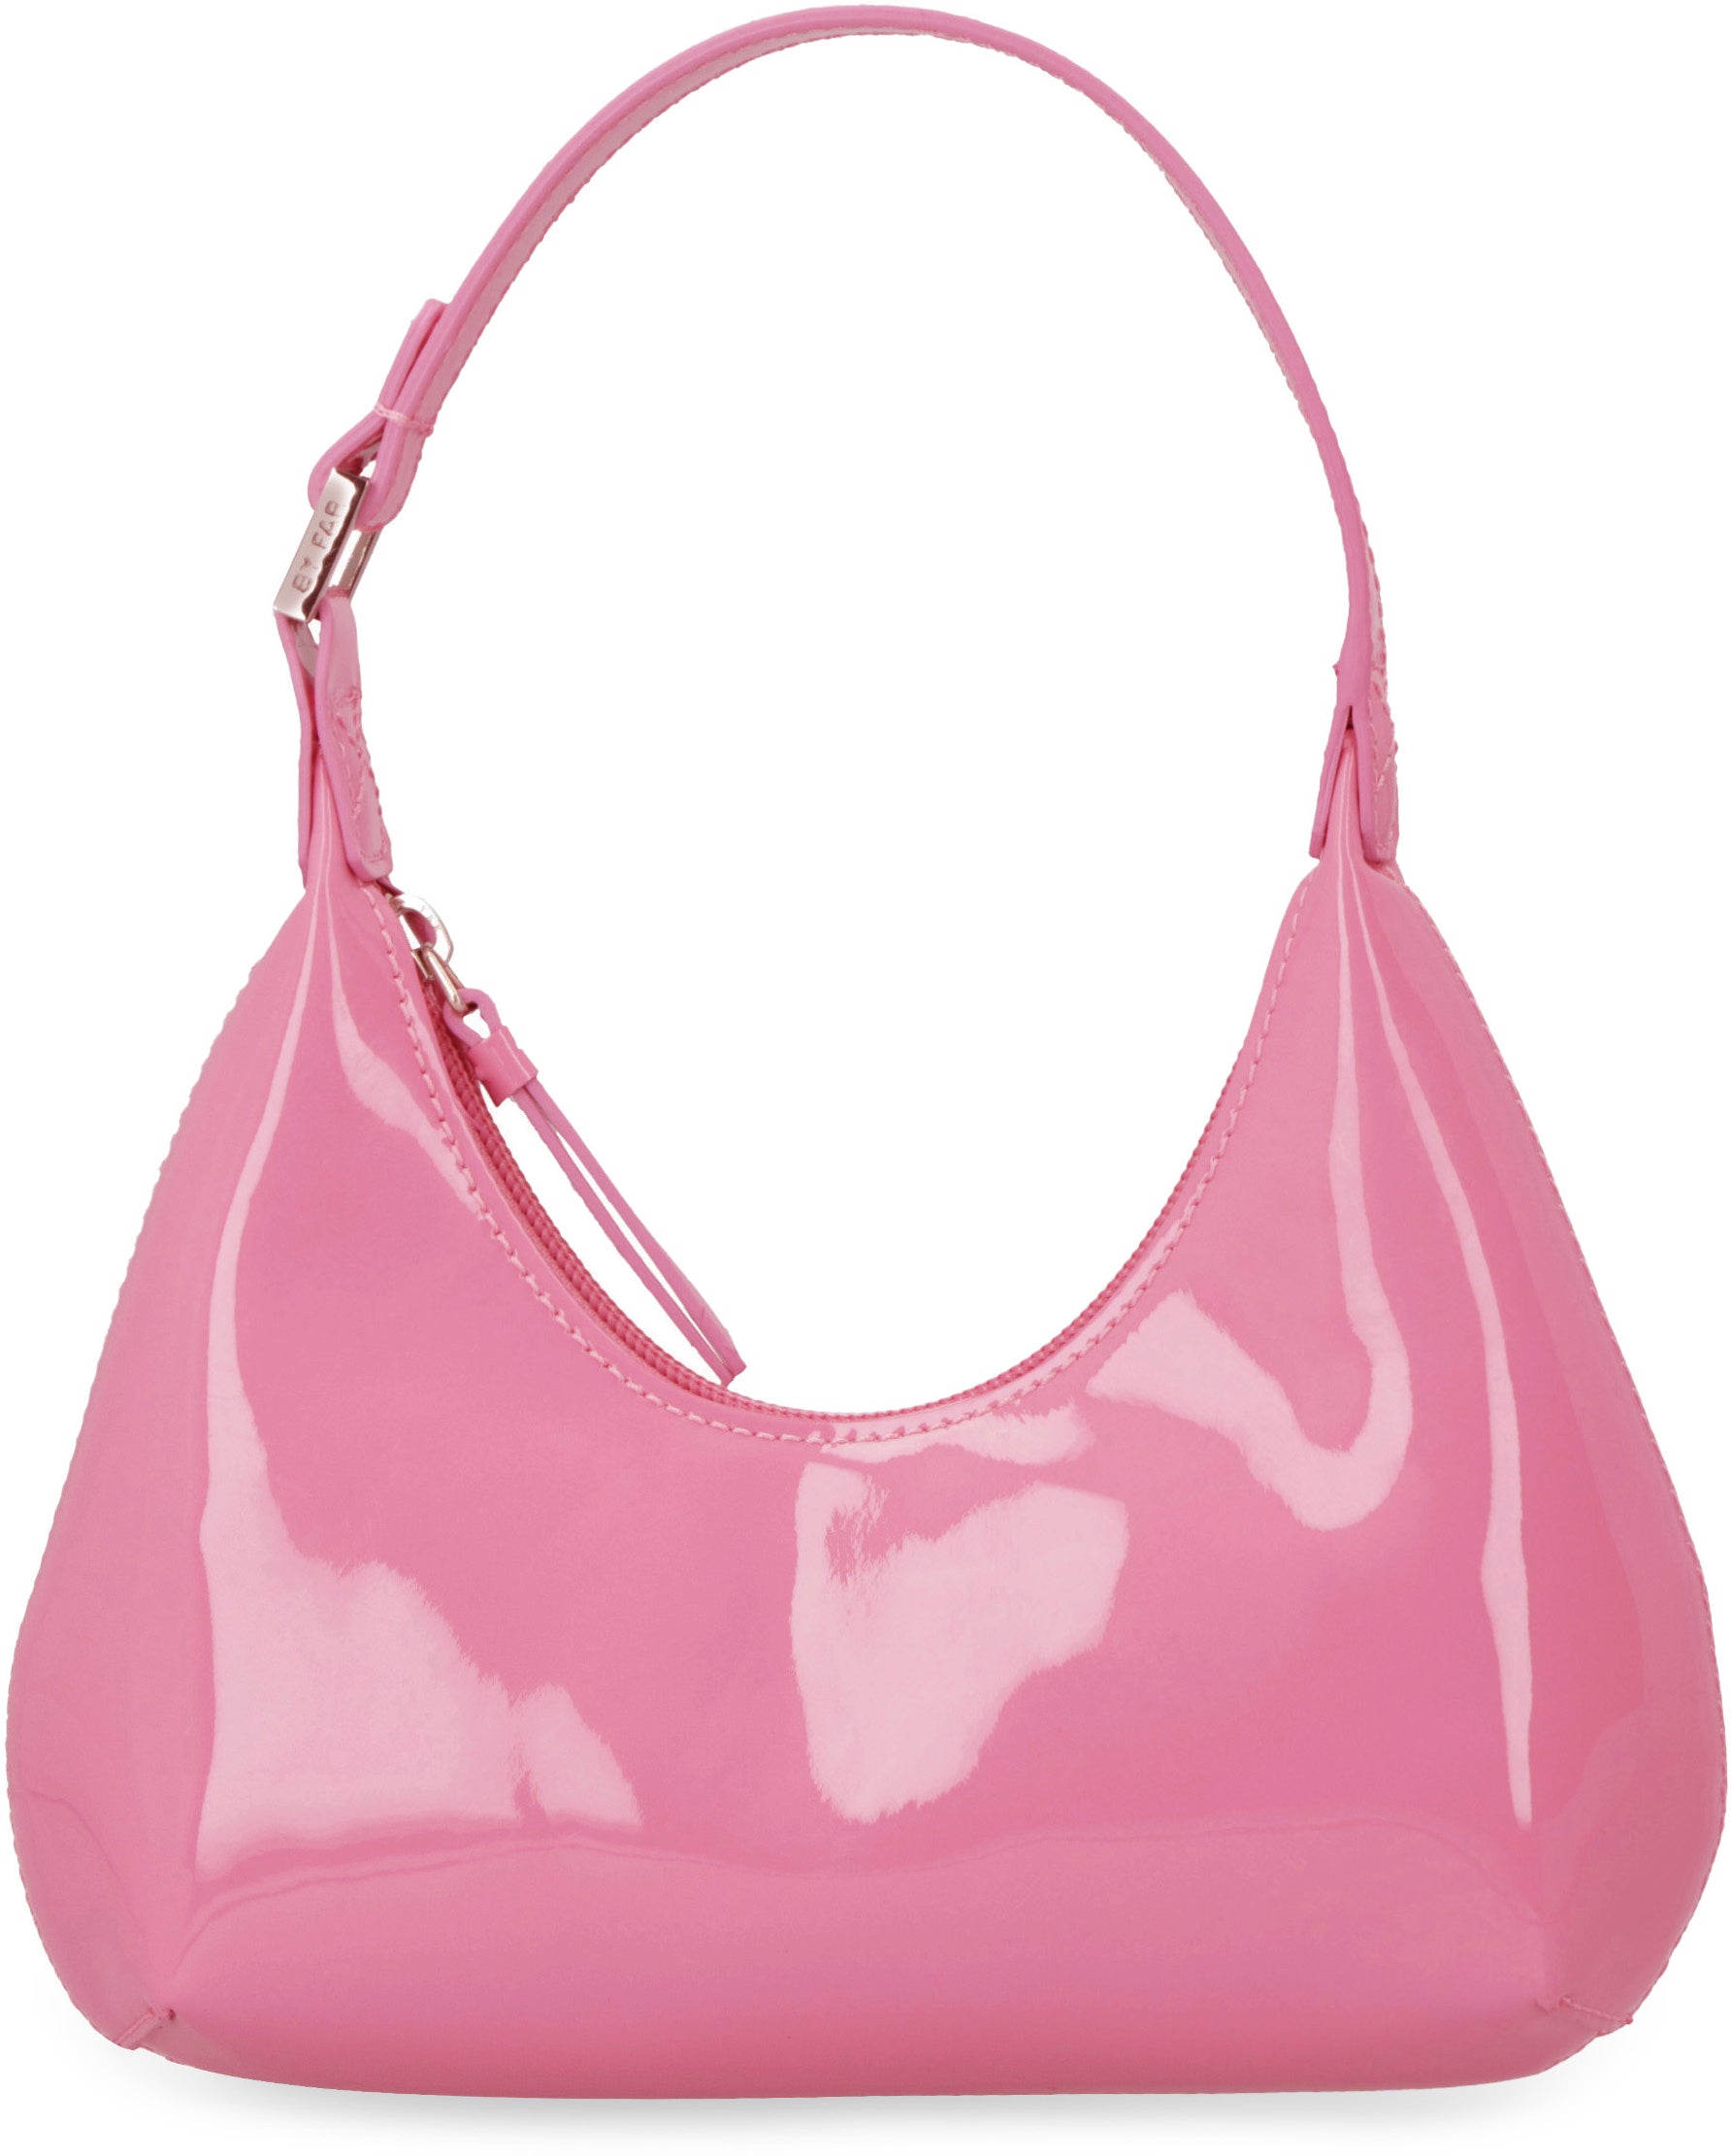 by Far Baby Amber Patent Leather Shoulder Bag - Pink